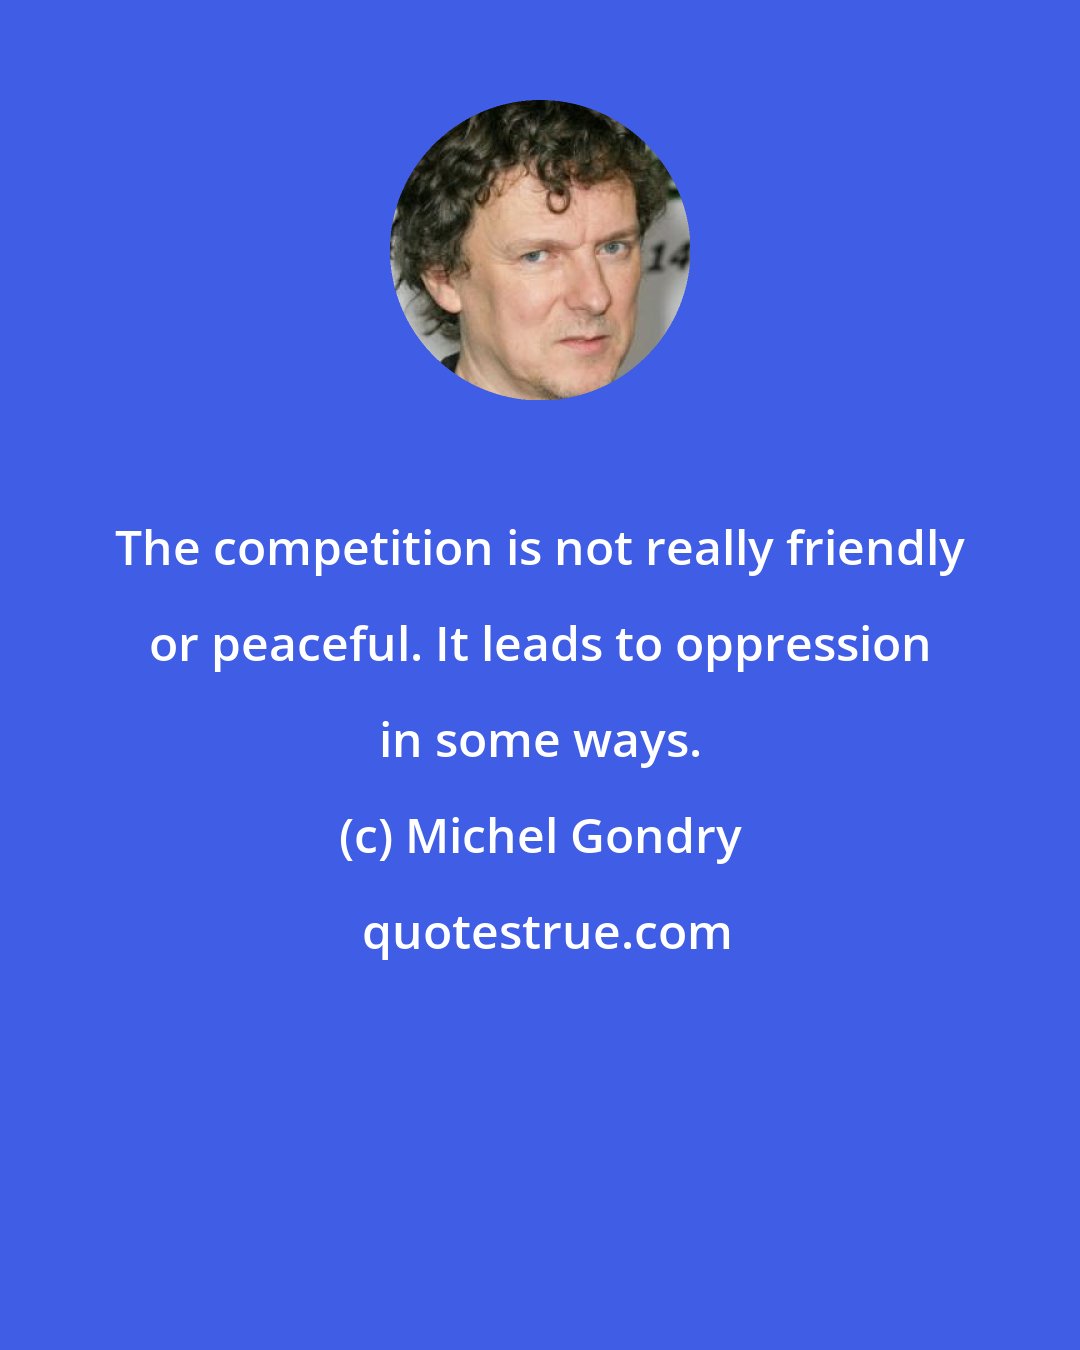 Michel Gondry: The competition is not really friendly or peaceful. It leads to oppression in some ways.